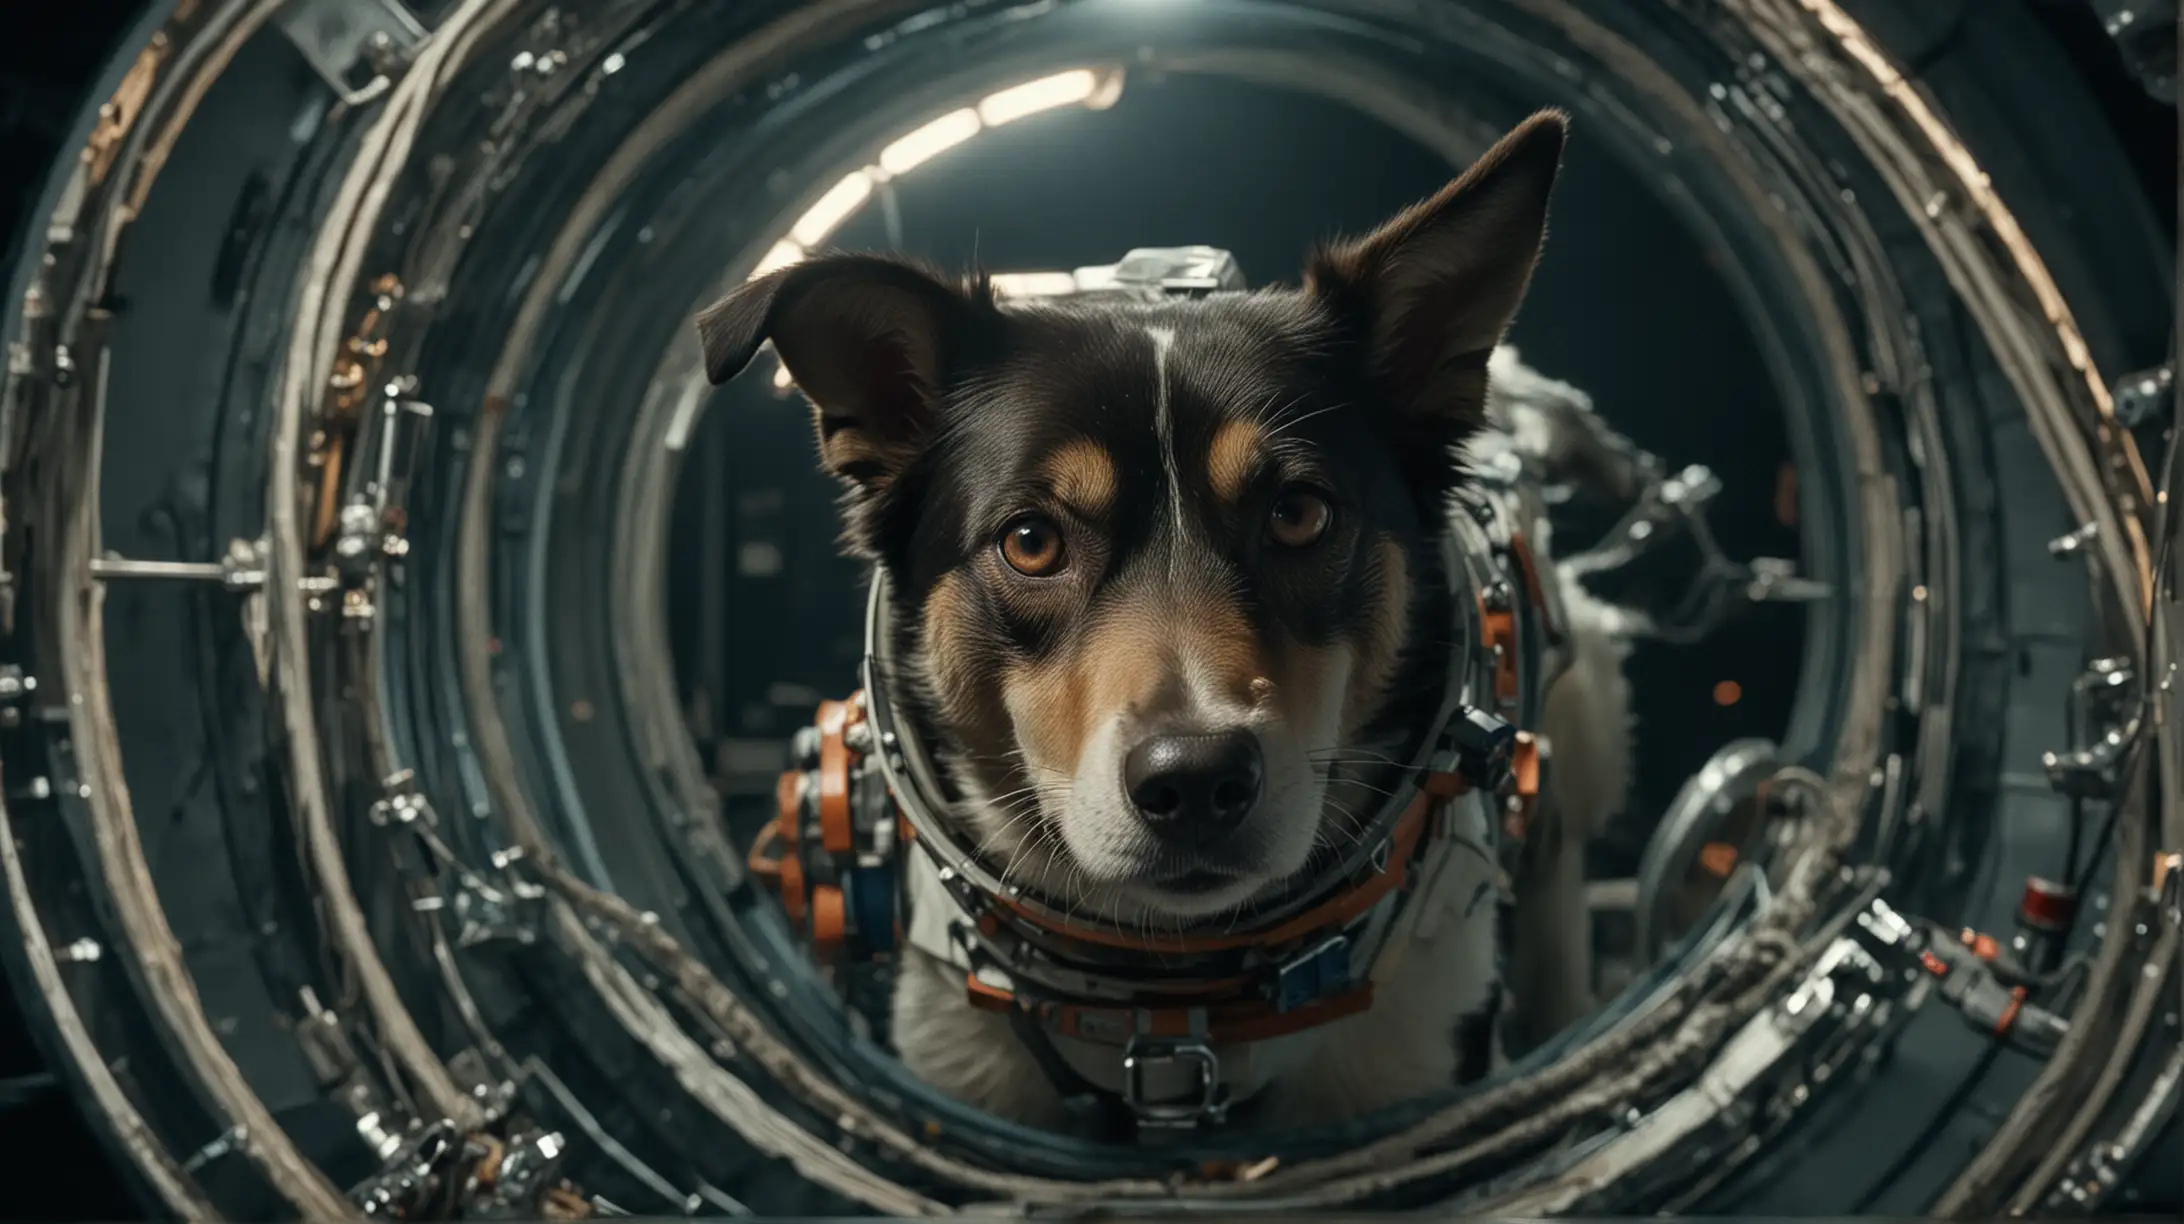 wide mastershot of laika the real life female dog in space costume, inside sputnik the Russian spacecraft, looking down at earth with hope and pain in the eyes